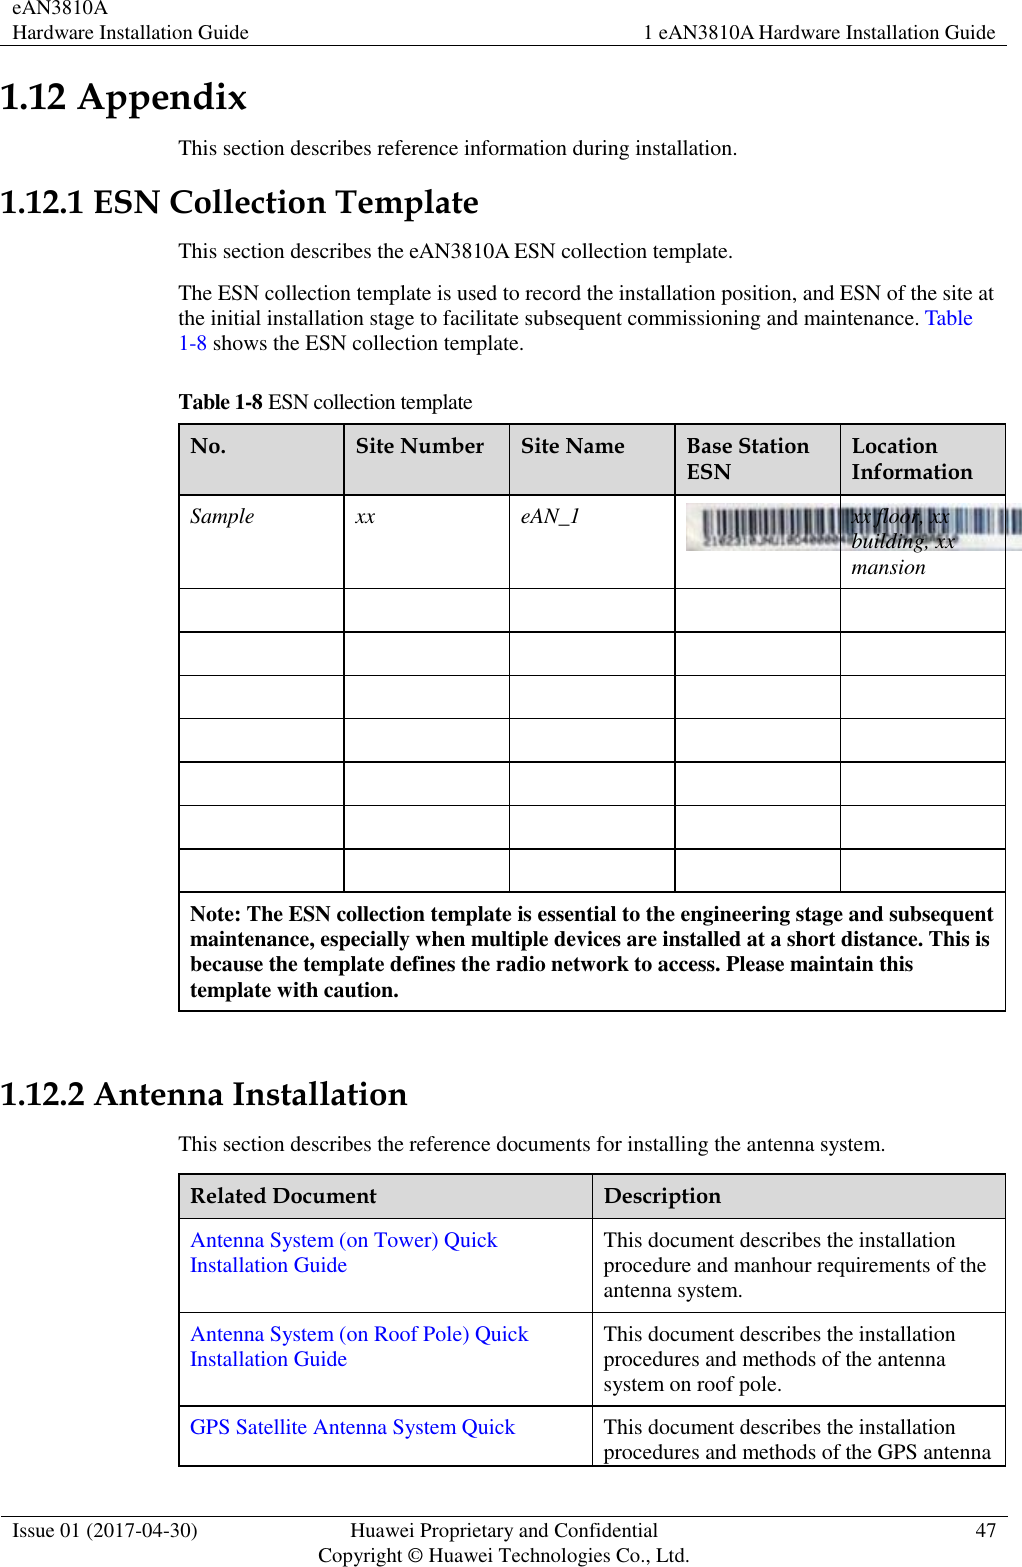 eAN3810A   Hardware Installation Guide 1 eAN3810A Hardware Installation Guide  Issue 01 (2017-04-30) Huawei Proprietary and Confidential                                     Copyright © Huawei Technologies Co., Ltd. 47  1.12 Appendix This section describes reference information during installation.   1.12.1 ESN Collection Template This section describes the eAN3810A ESN collection template. The ESN collection template is used to record the installation position, and ESN of the site at the initial installation stage to facilitate subsequent commissioning and maintenance. Table 1-8 shows the ESN collection template. Table 1-8 ESN collection template No. Site Number Site Name Base Station ESN Location Information Sample xx eAN_1  xx floor, xx building, xx   mansion                                    Note: The ESN collection template is essential to the engineering stage and subsequent maintenance, especially when multiple devices are installed at a short distance. This is because the template defines the radio network to access. Please maintain this template with caution.  1.12.2 Antenna Installation This section describes the reference documents for installing the antenna system. Related Document Description Antenna System (on Tower) Quick Installation Guide This document describes the installation procedure and manhour requirements of the antenna system. Antenna System (on Roof Pole) Quick Installation Guide This document describes the installation procedures and methods of the antenna system on roof pole. GPS Satellite Antenna System Quick This document describes the installation procedures and methods of the GPS antenna 